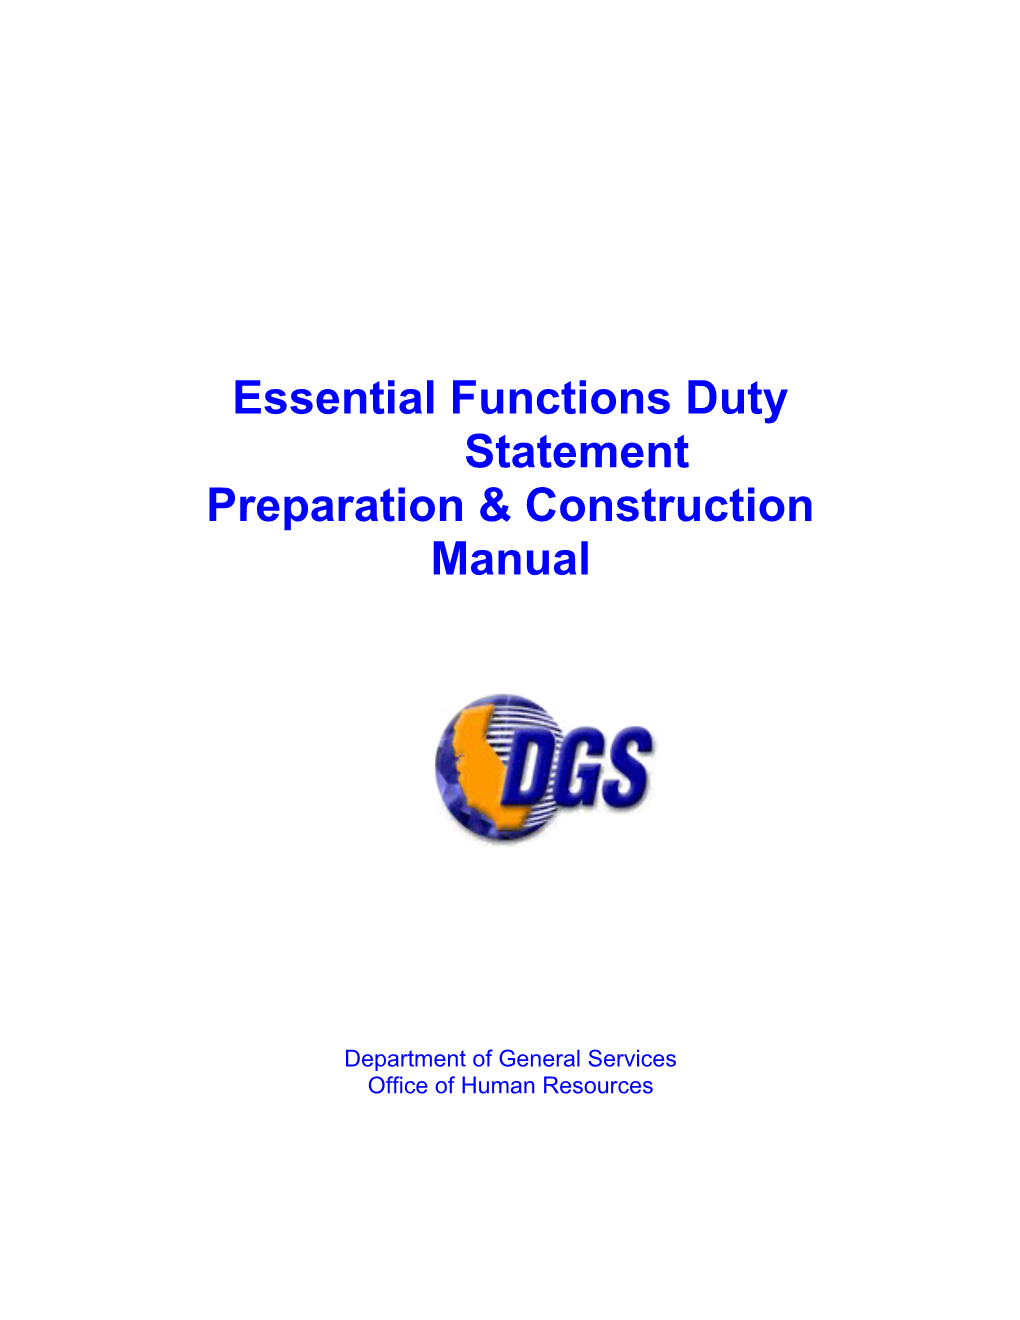 Essential Functions Duty Statement